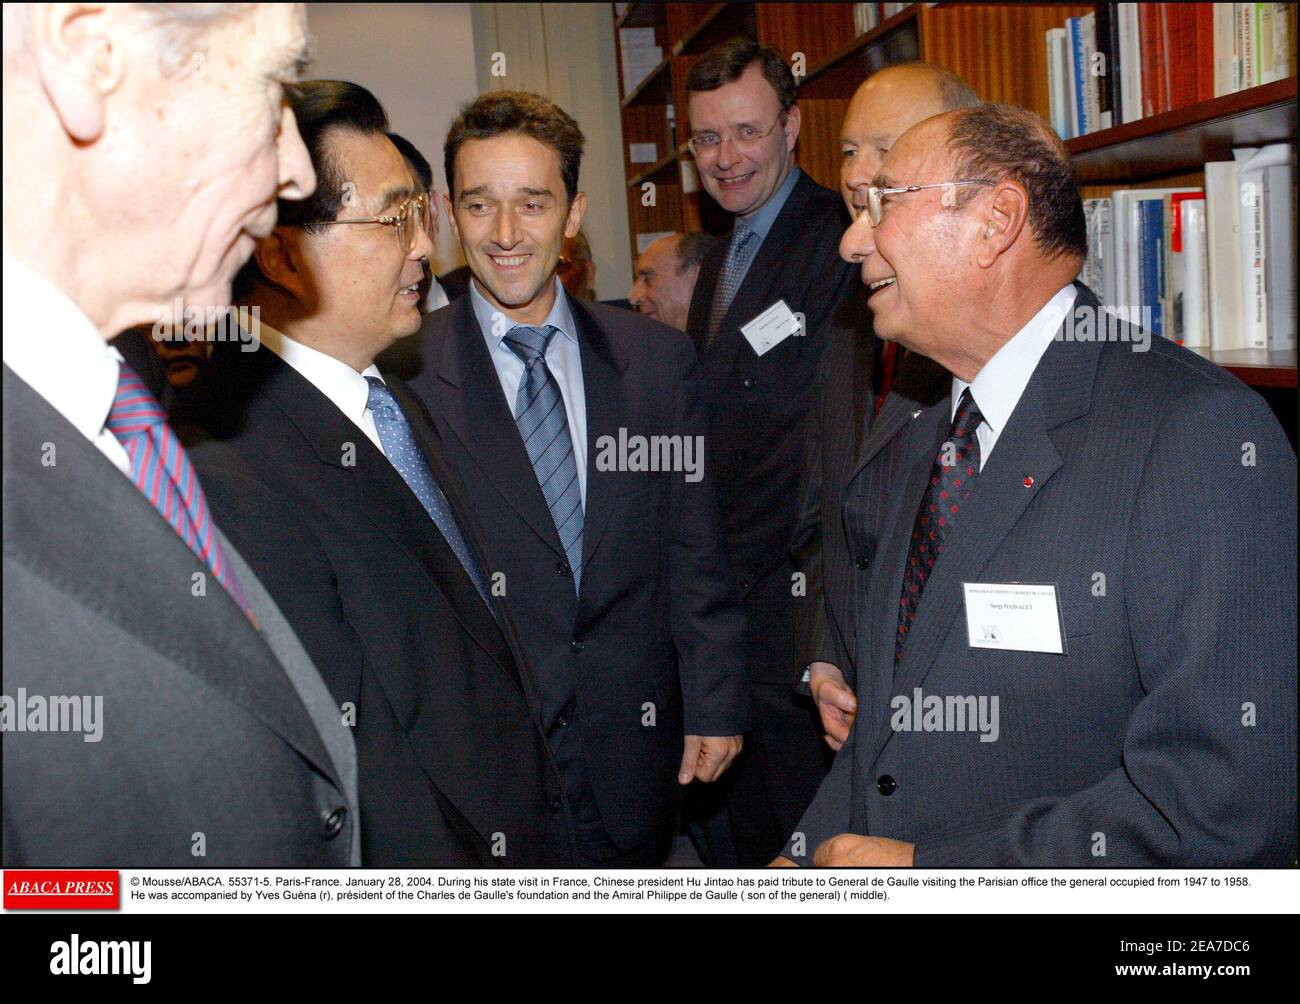 © Mousse/ABACA. 55371-5. Paris-France. January 28, 2004. During his state visit in France, Chinese president Hu Jintao has paid tribute to General de Gaulle visiting the Parisian office the general occupied from 1947 to 1958. He was accompanied by Yves Guna, prsident of the Charles de Gaulle's foundation and the Amiral Philippe de Gaulle, son of General de Gaulle. Stock Photo